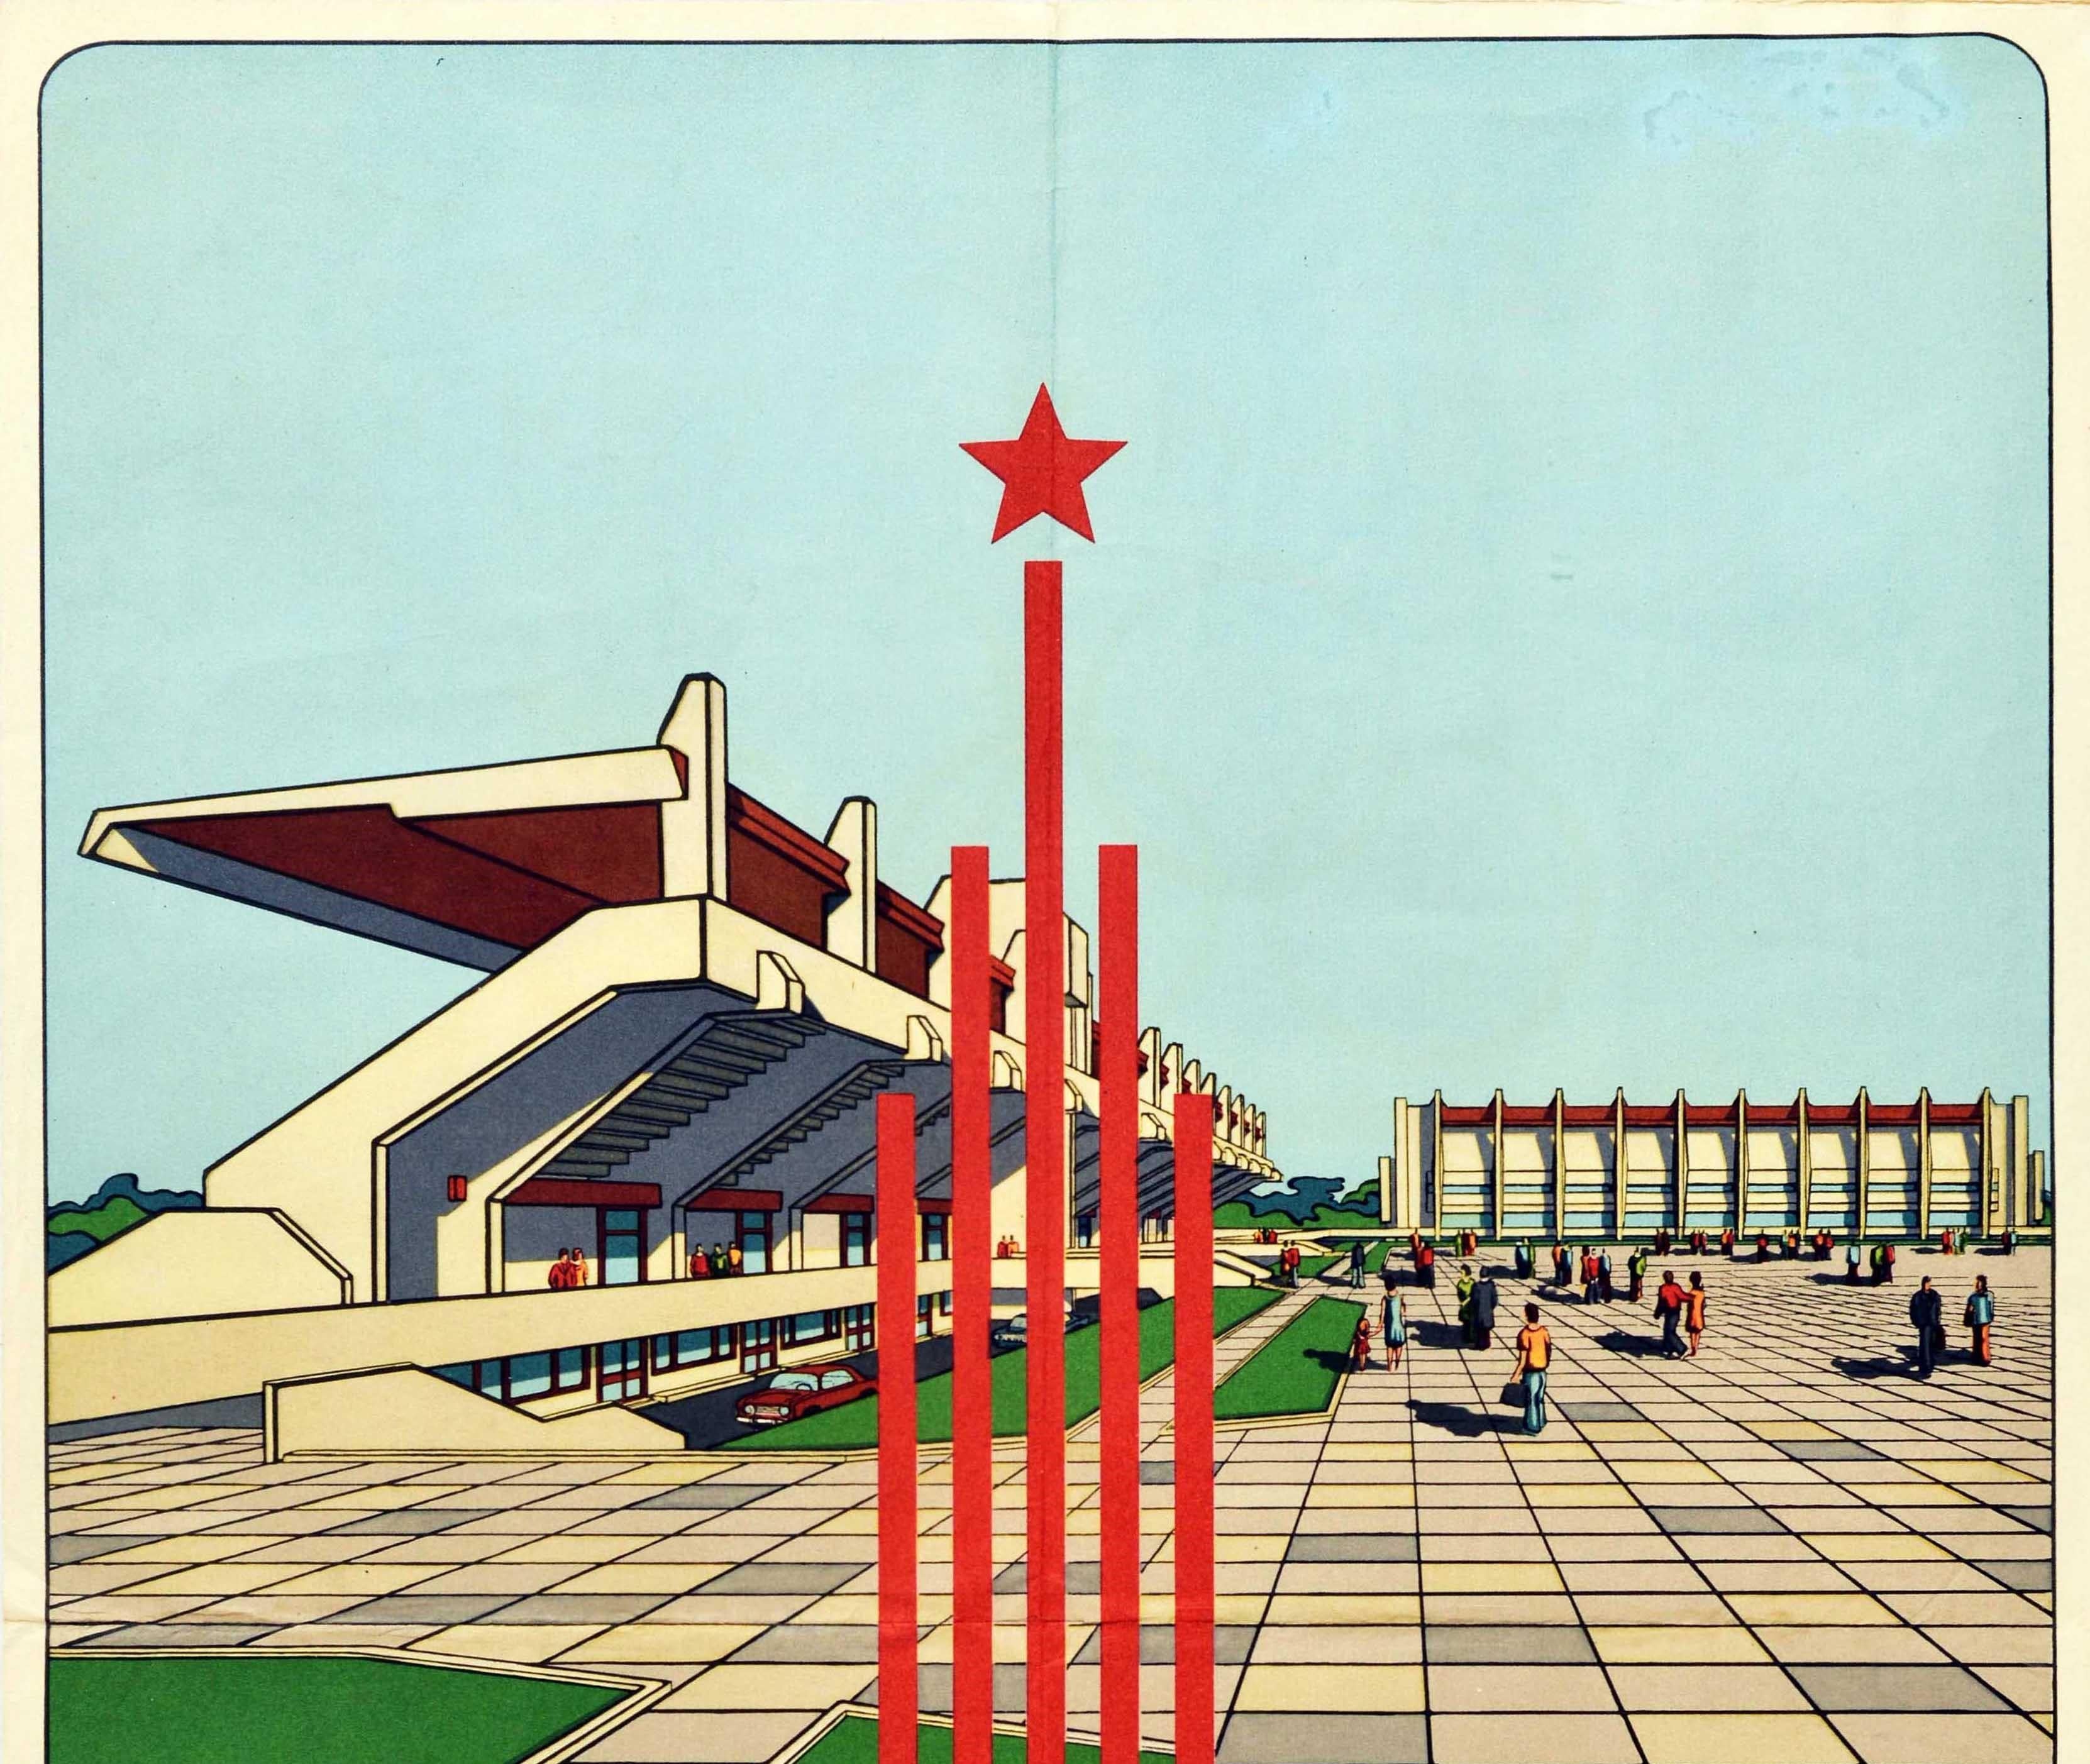 Original vintage sport event poster for the 1980 Moscow Olympic equestrian competitions featuring a futuristic image of people walking around the paved area with grass borders next to the stadium seating building at the equestrian centre in